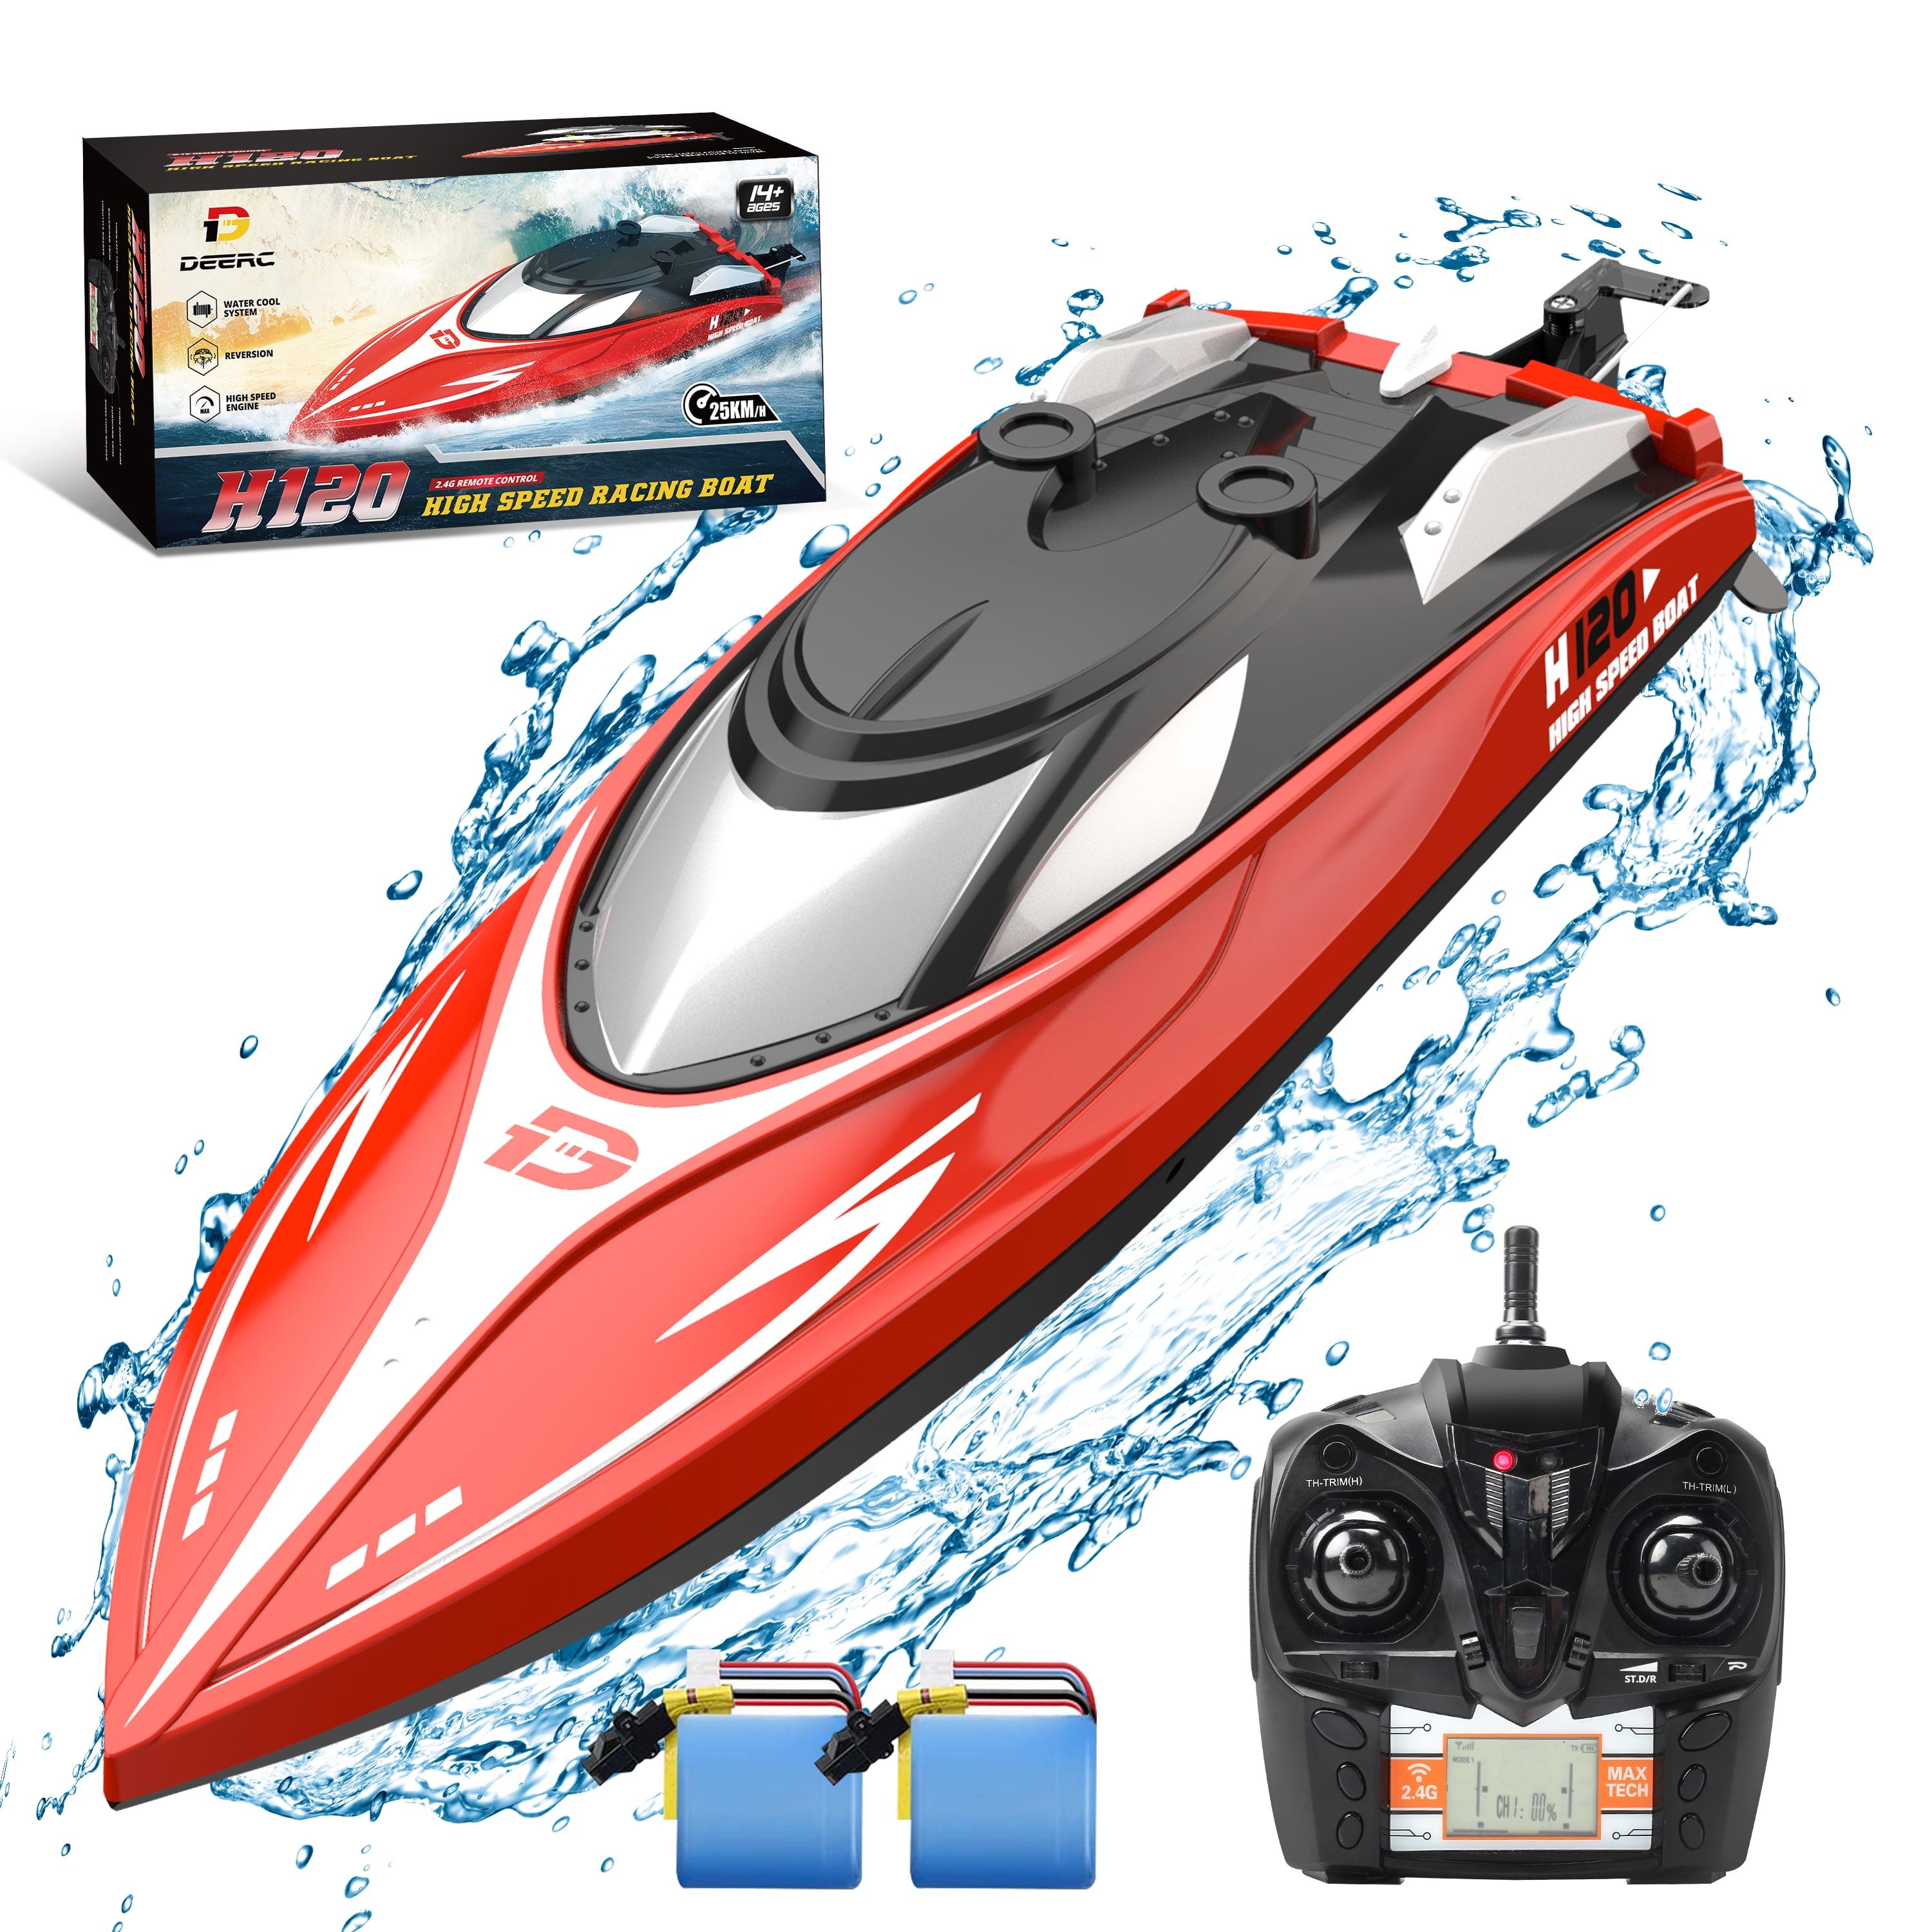 Rc Speed Boat: Popular Uses and Advancements in RC Speed Boats